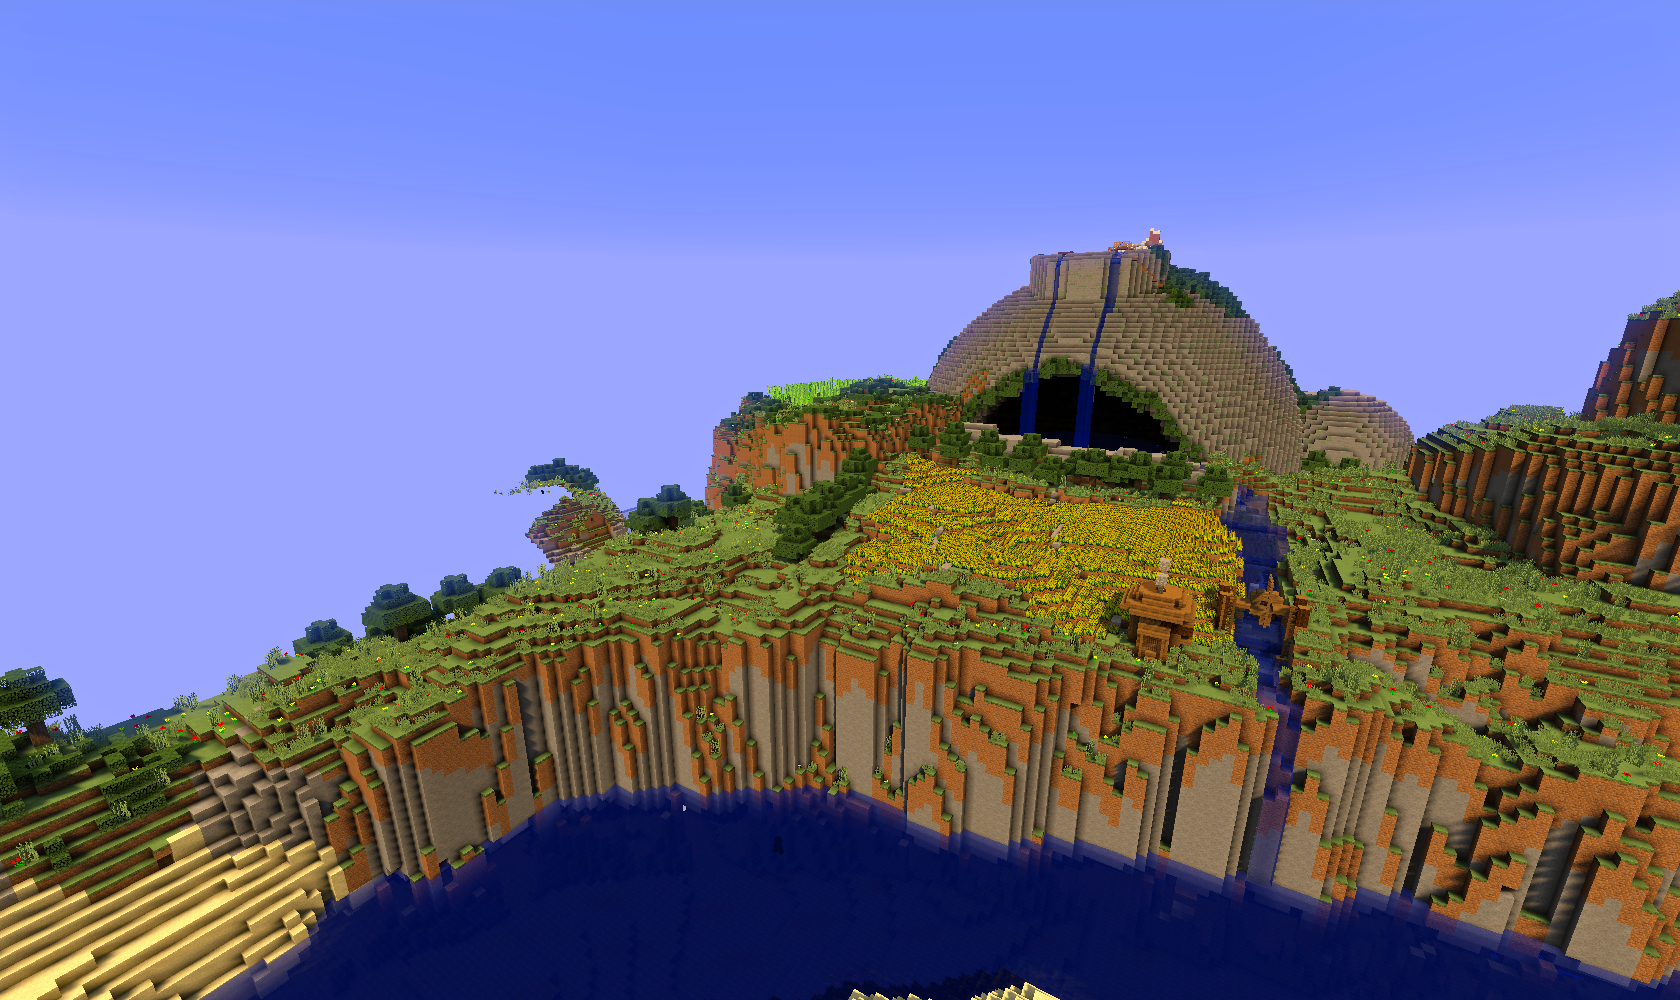 Minecraft piggy island from angry birds - Maps - Mapping 